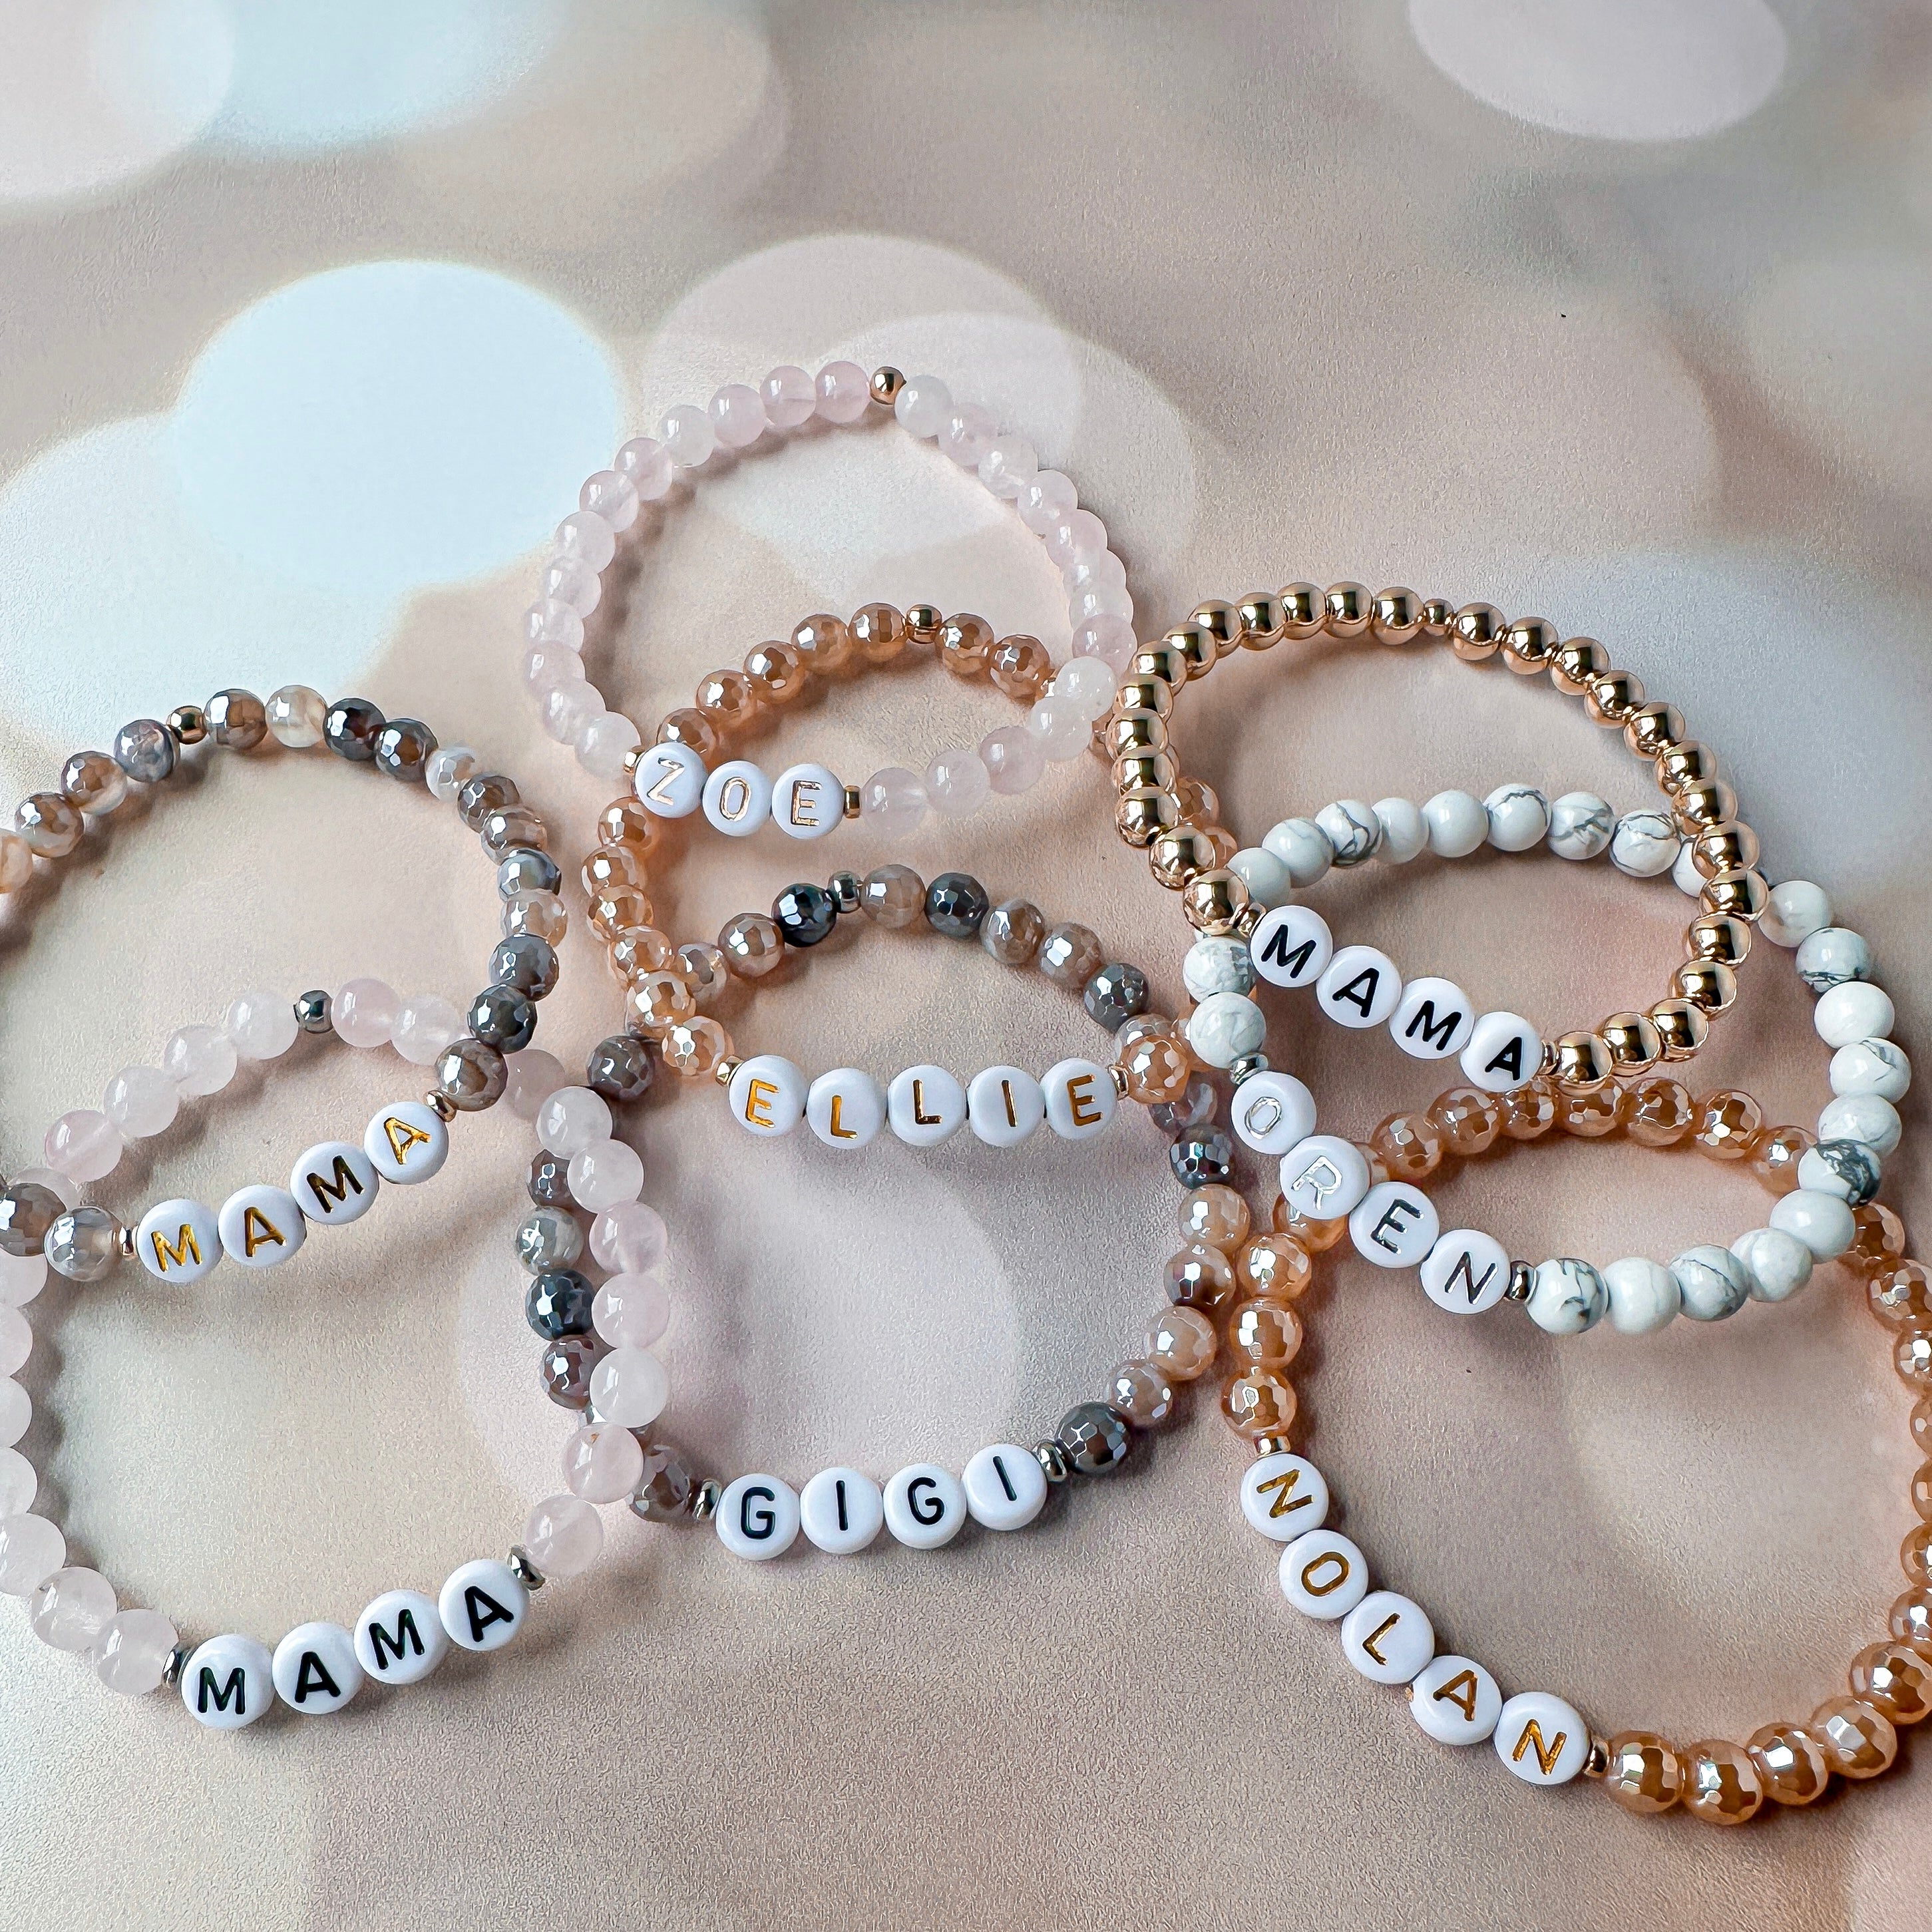 Featherly personalized custom beaded word and name bracelets